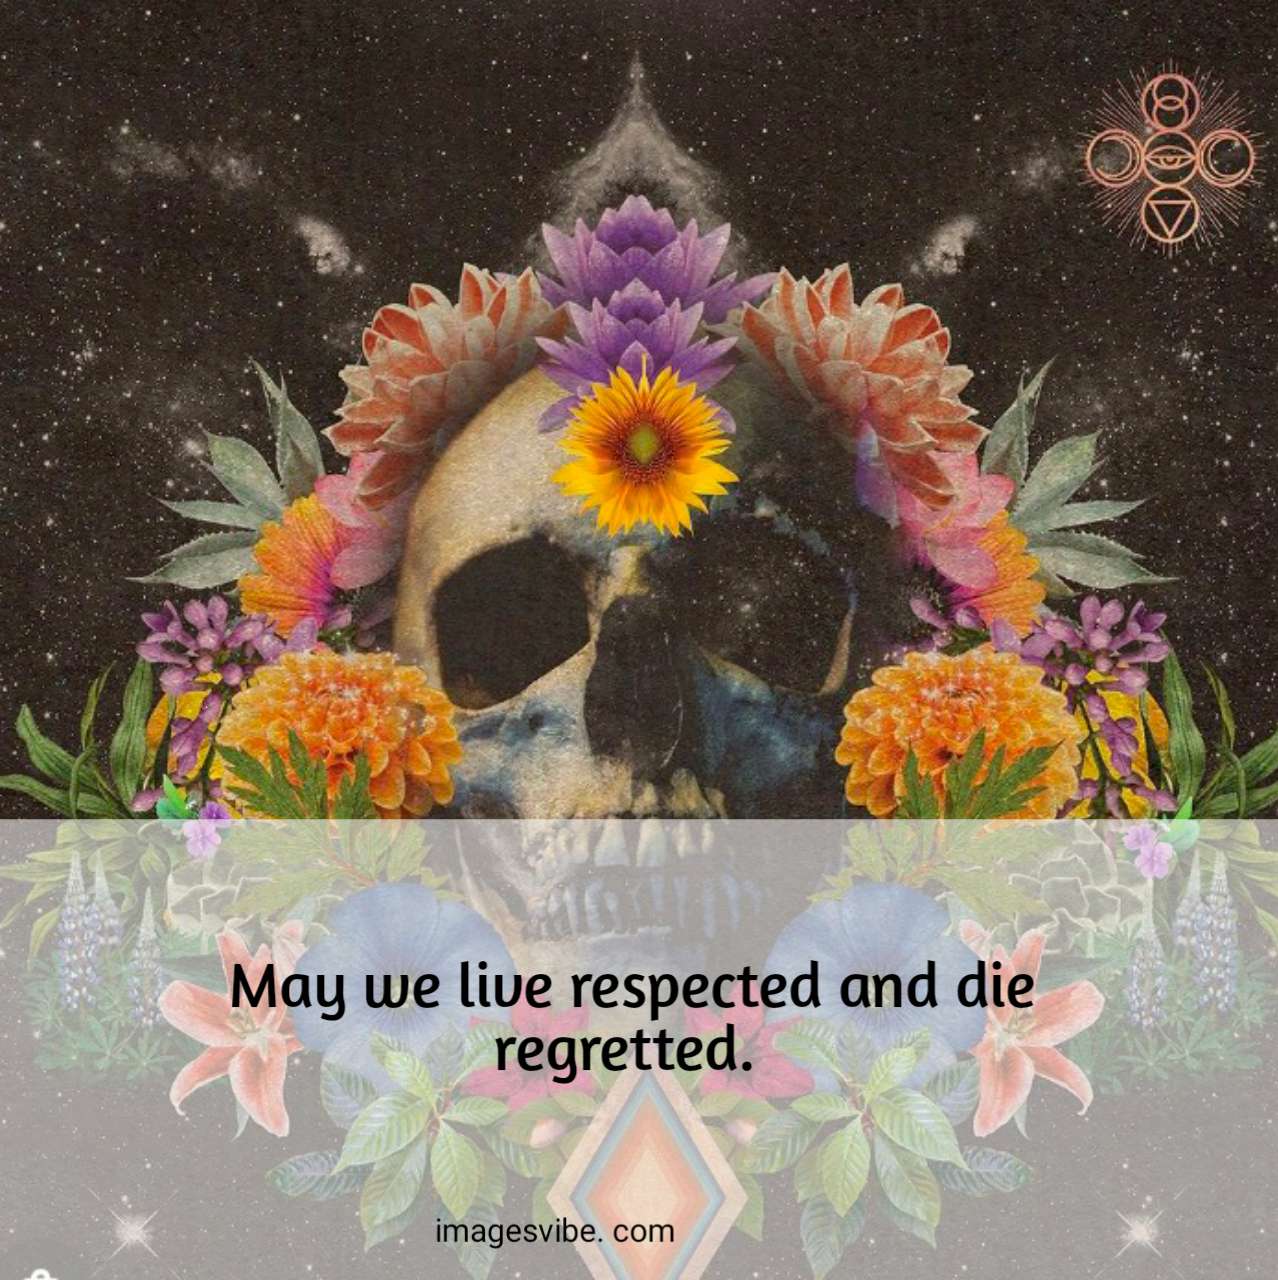 Images With Quotes About Death12 